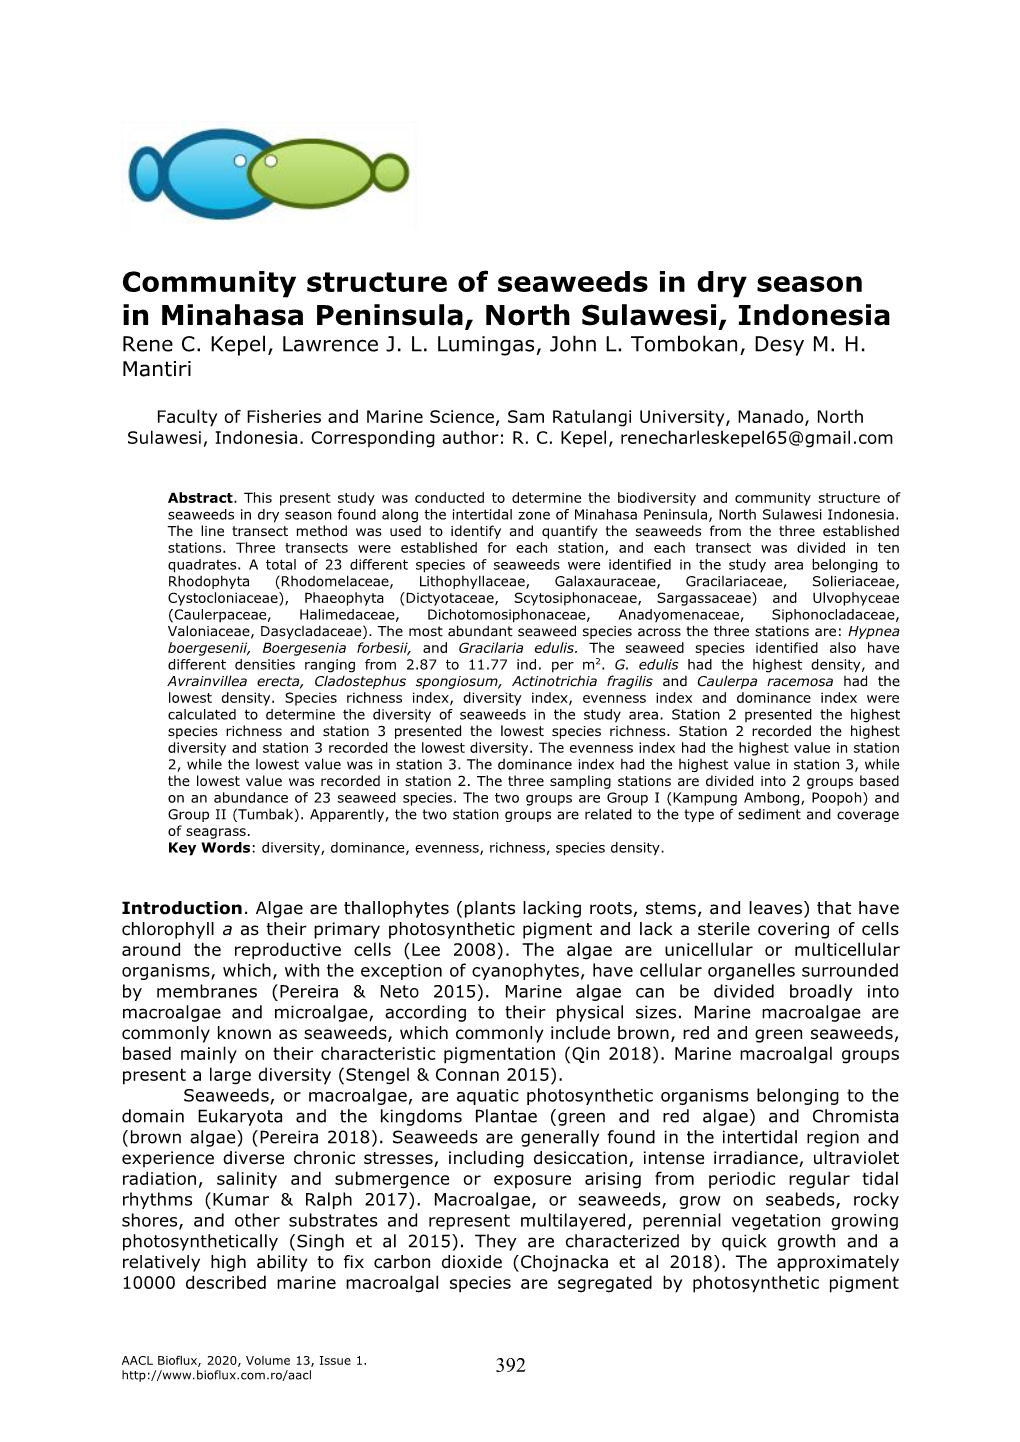 Community Structure of Seaweeds in Dry Season in Minahasa Peninsula, North Sulawesi, Indonesia. AACL Bioflux 13(1):392-402